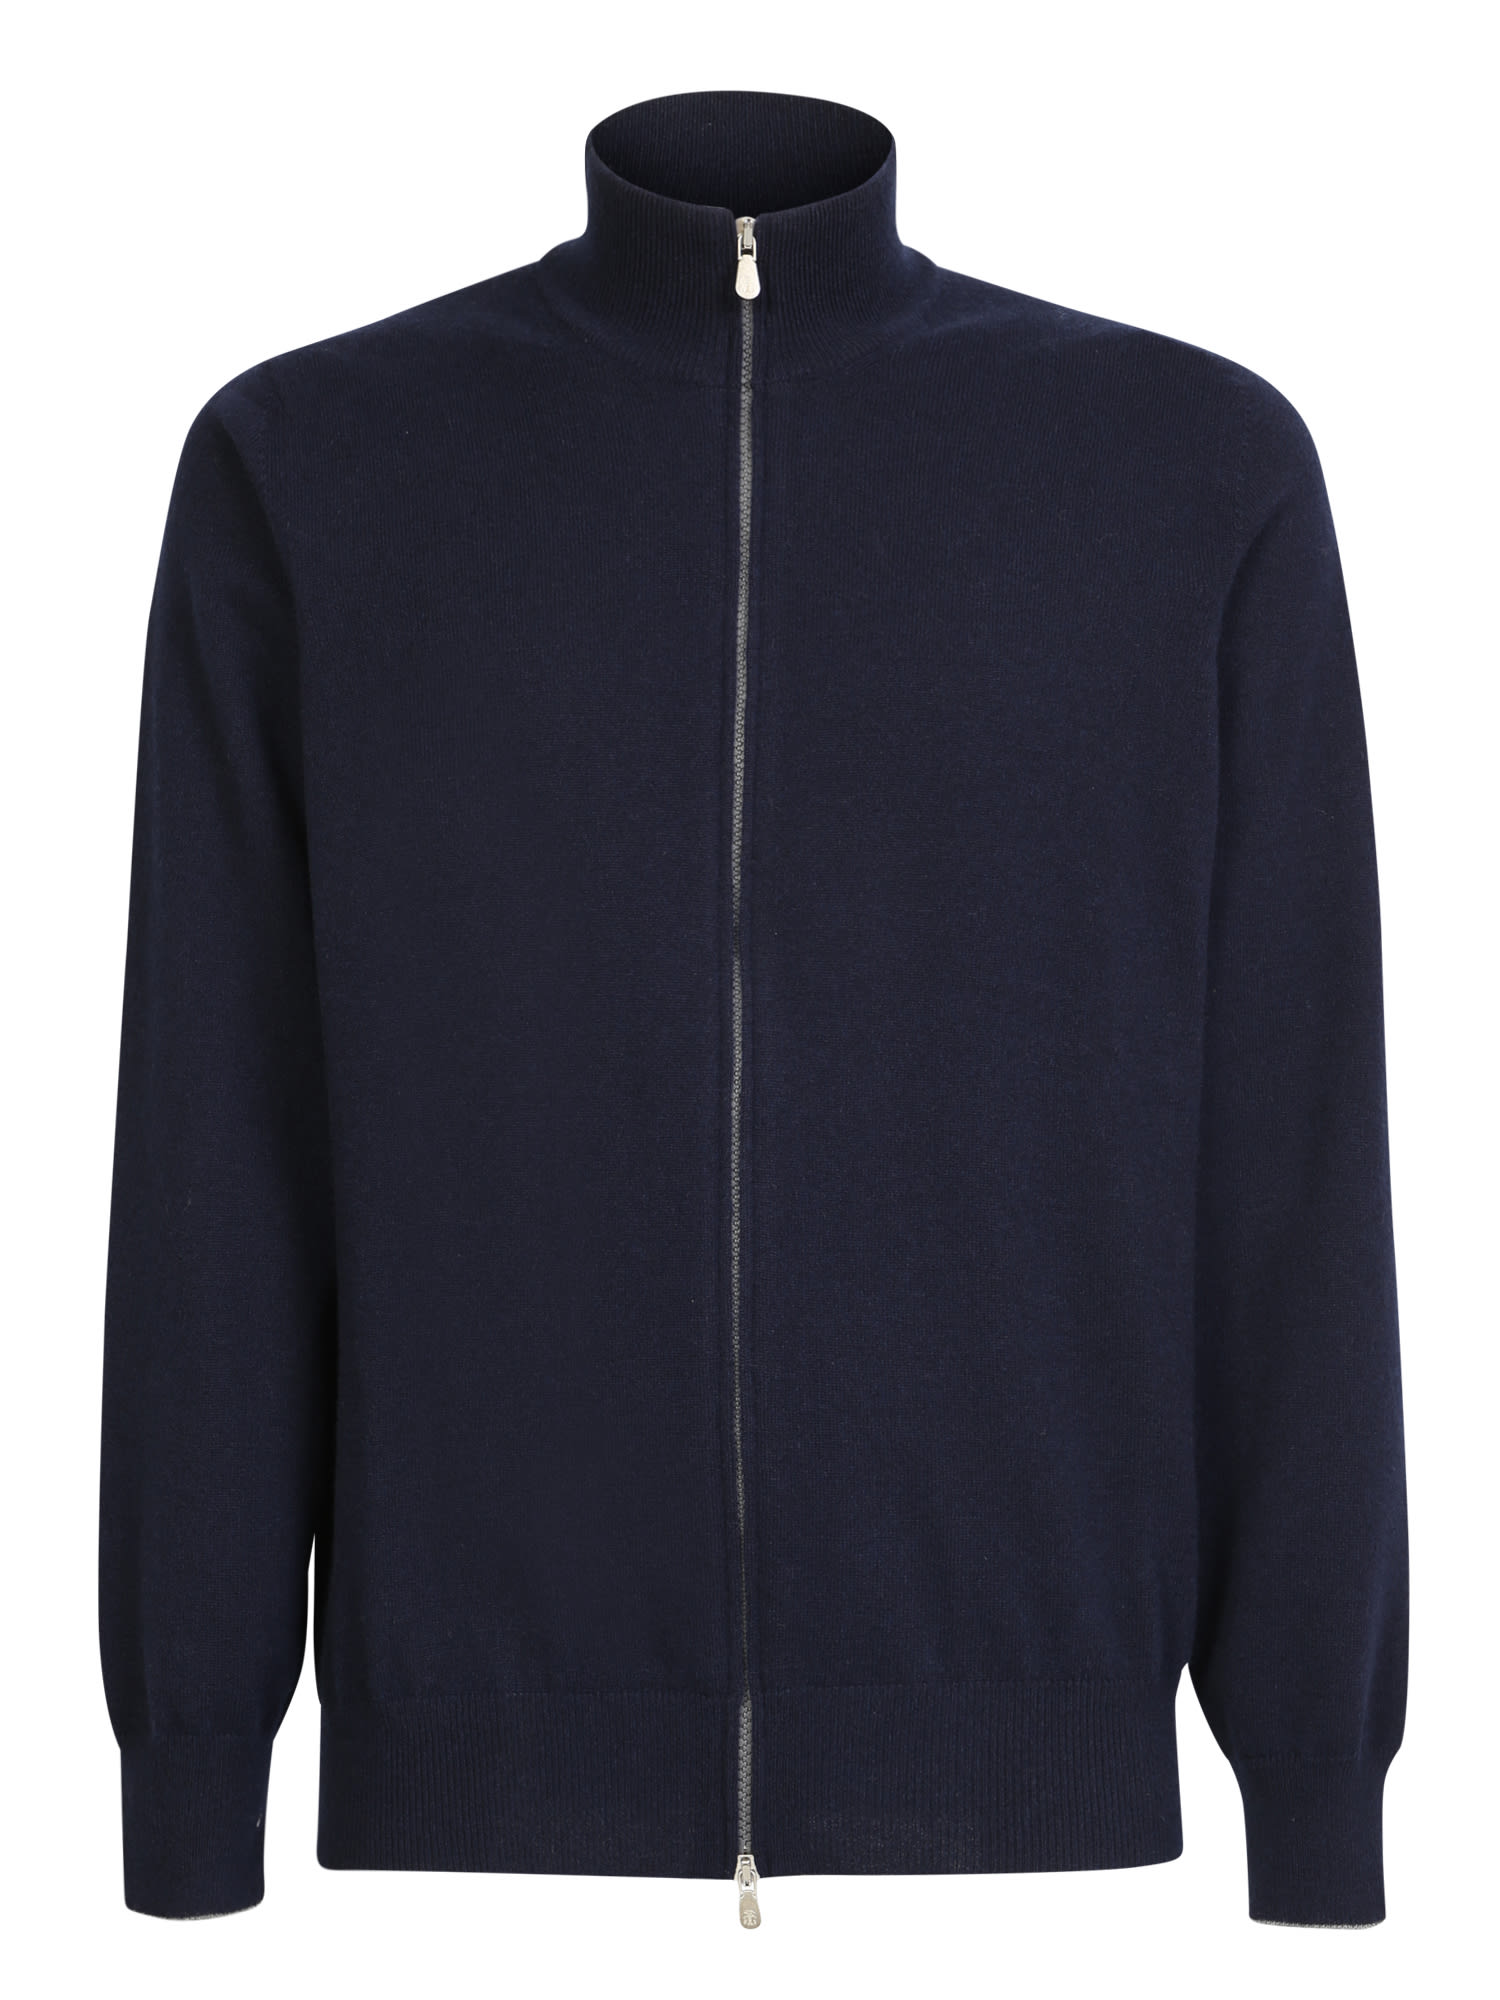 Brunello Cucinelli This Timeless Cardigan By Is Made Of Soft Cashmere